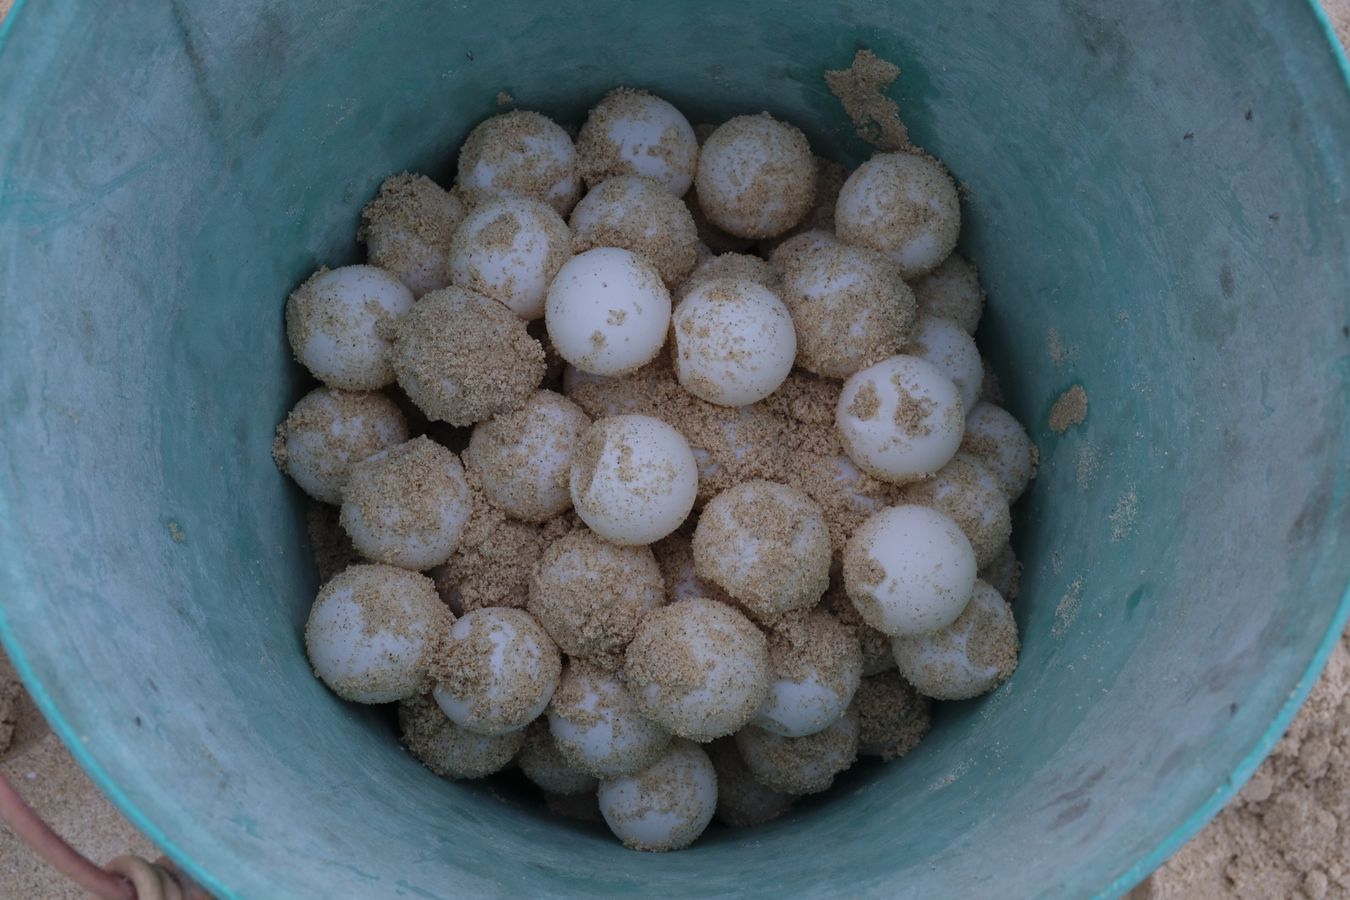 Bucket with green turtle eggs recently removed from their nest.